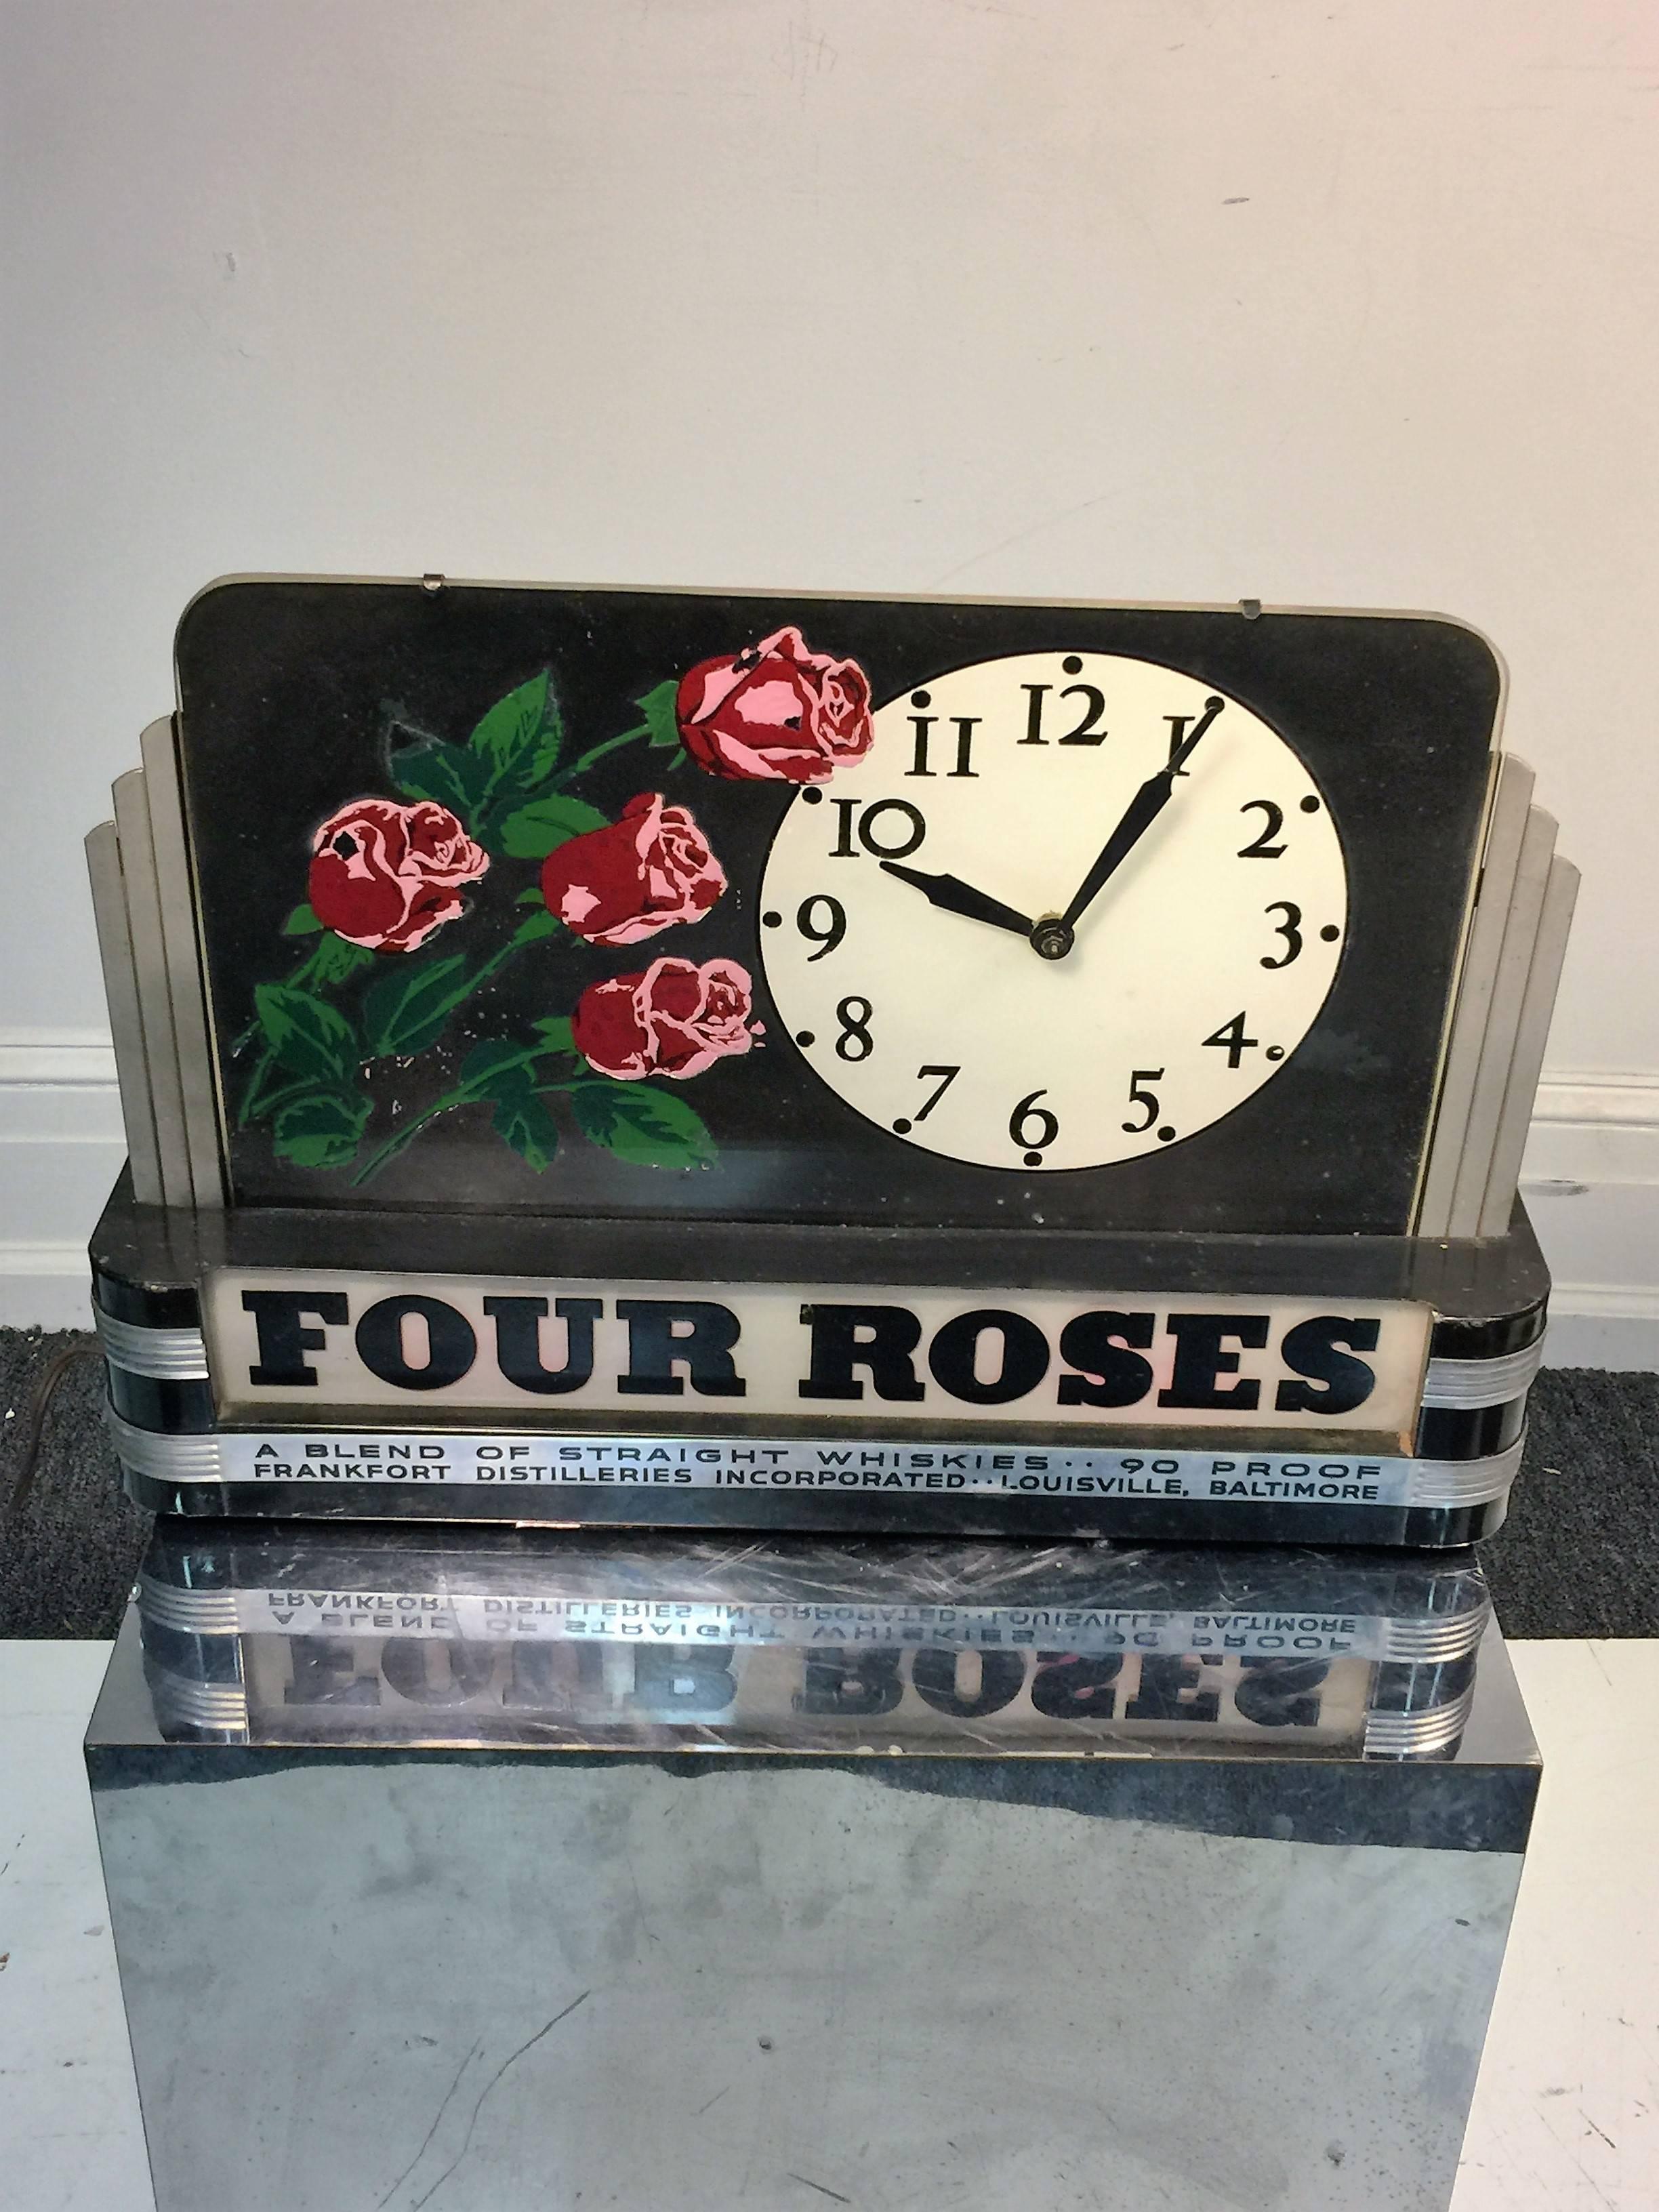  Lovely Illuminated Art Deco Four Roses Advertising Clock In Excellent Condition For Sale In Mount Penn, PA